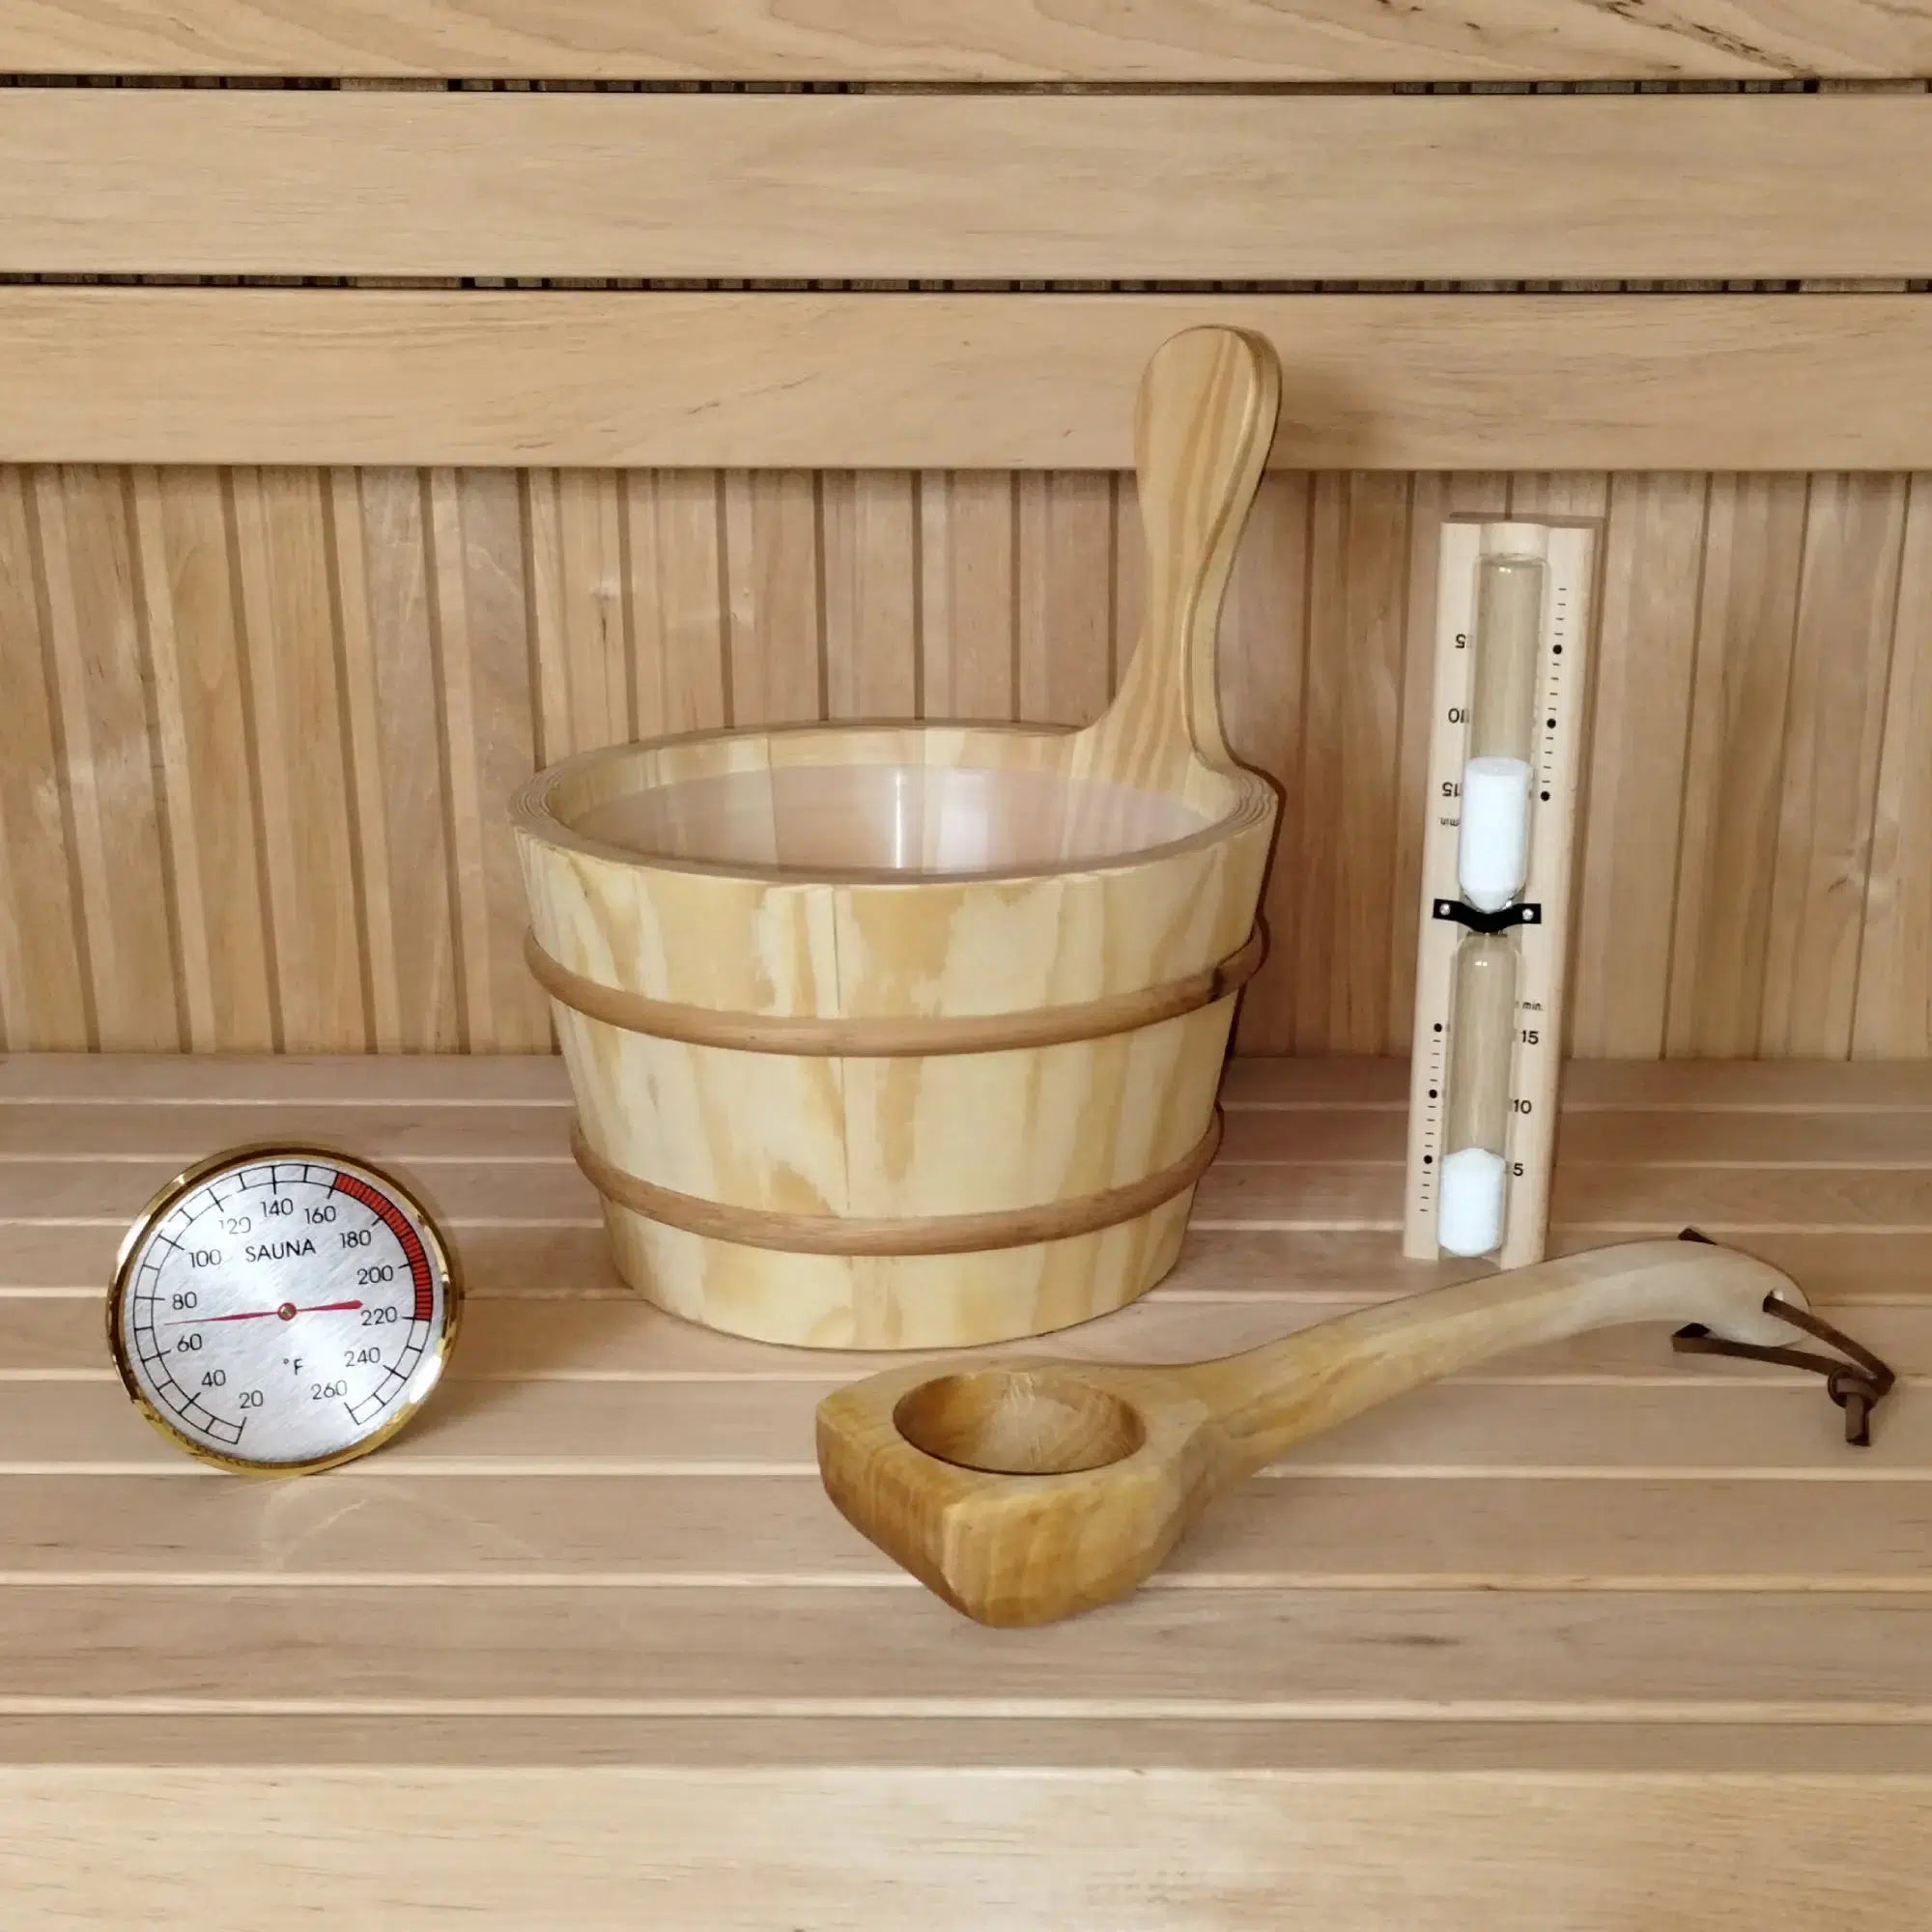 Bucket and Ladle Package 1, Ladle, Timer and Thermometer - Sauna Accessory Package - Purely Relaxation